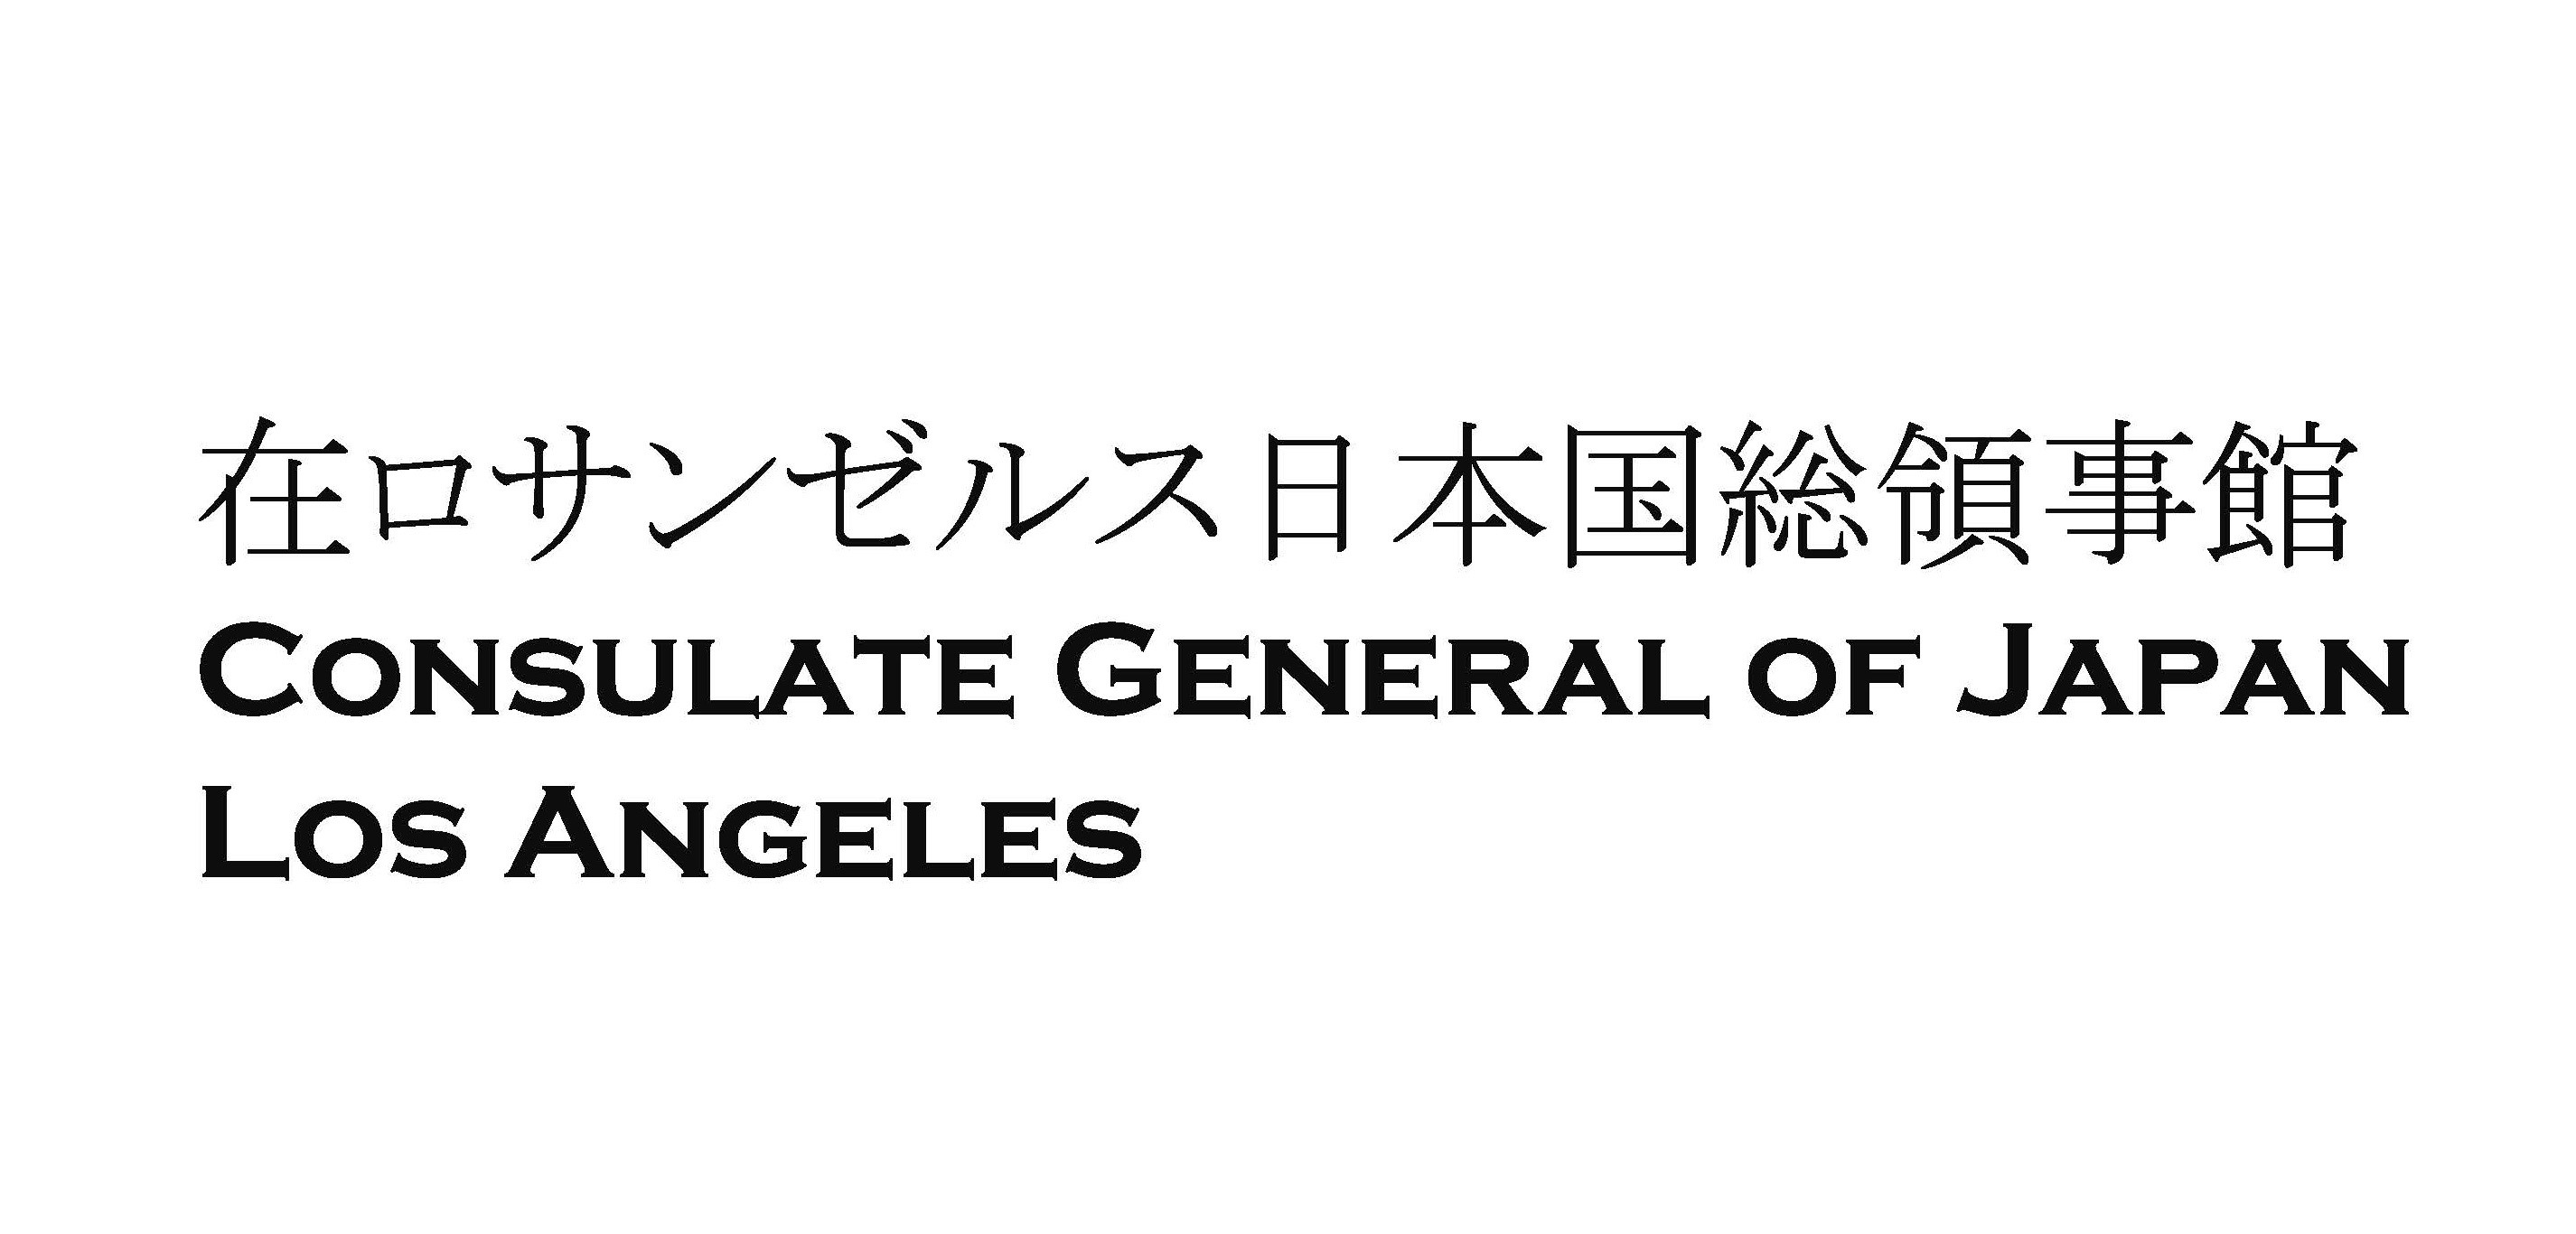 Consulate-General of Japan in Los Angeles